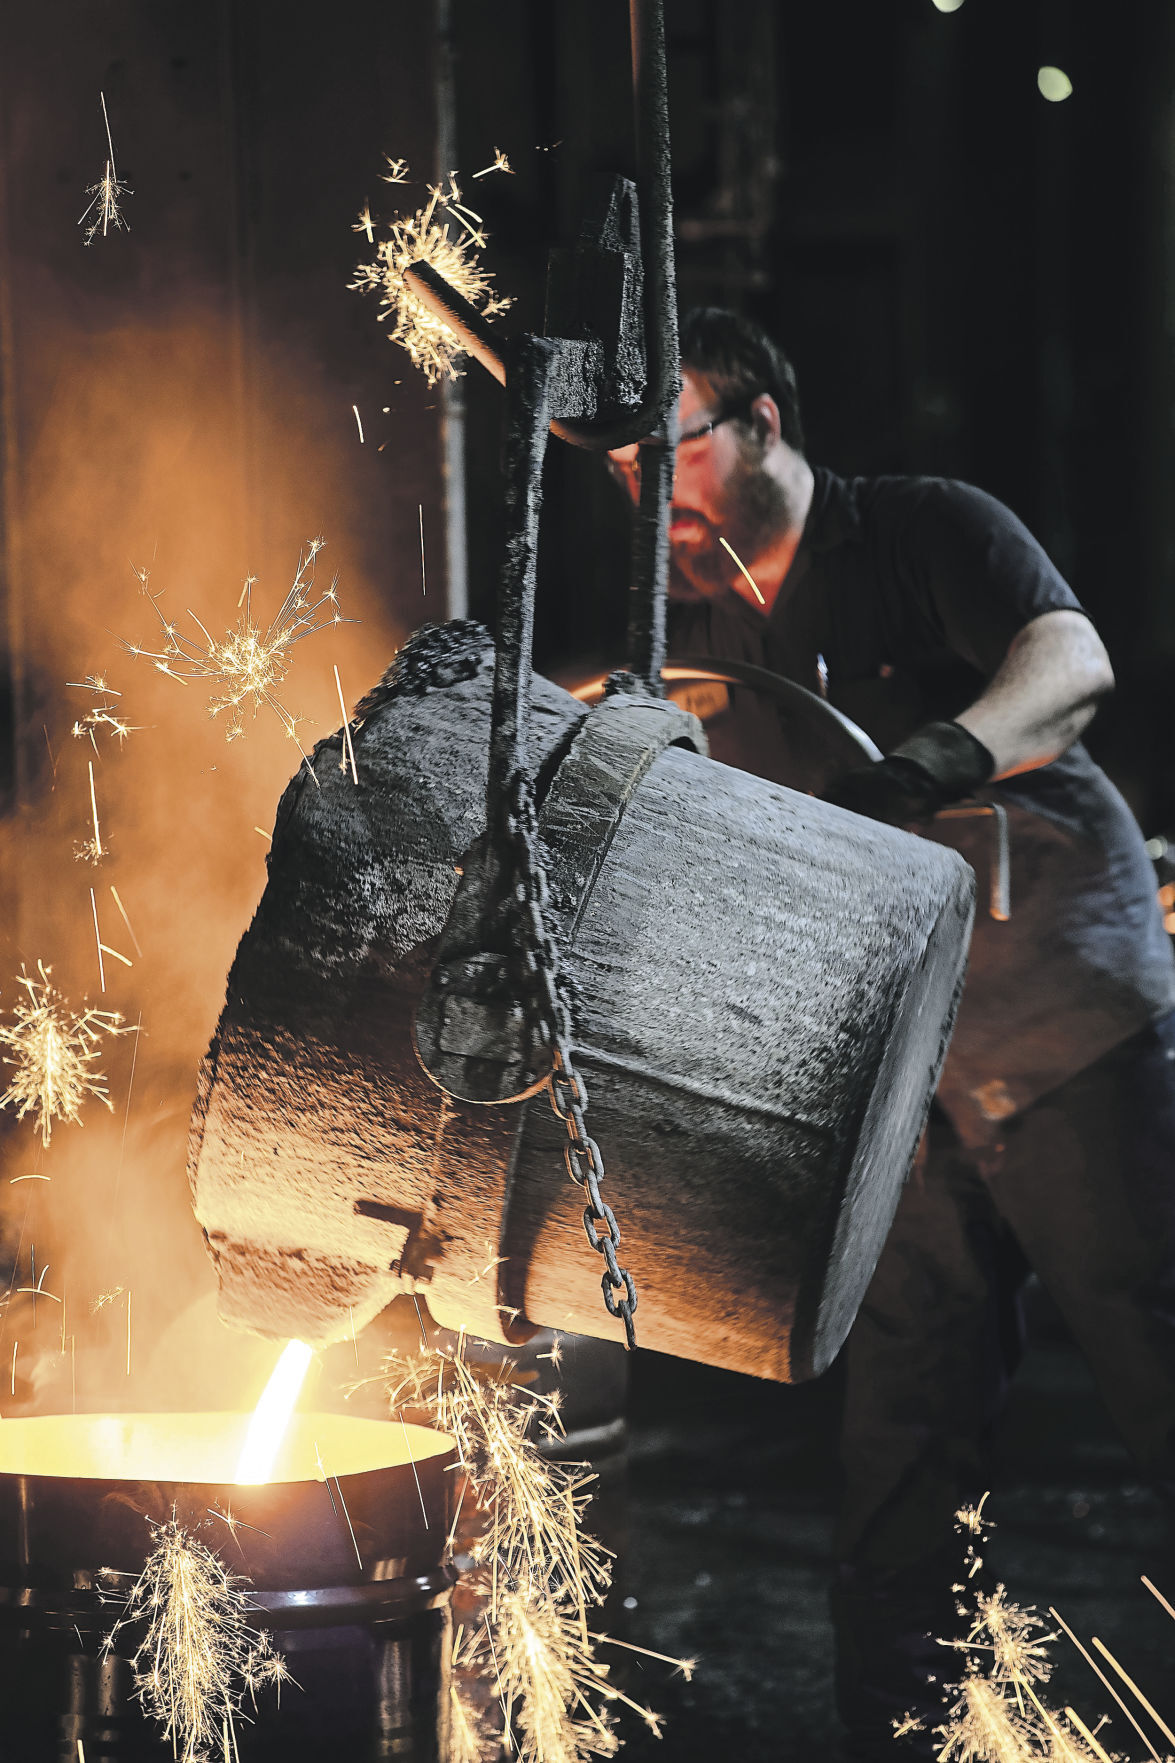 John Einsweiler pours molten iron from the bull ladle at the Lemfco foundry. Einsweiler owns the Galena, Ill., foundry with his sister, Desiree. It’s been at its 100 S. Commerce Street location since 1912. It has been under family ownership since it opened.    PHOTO CREDIT: Stephen Gassman